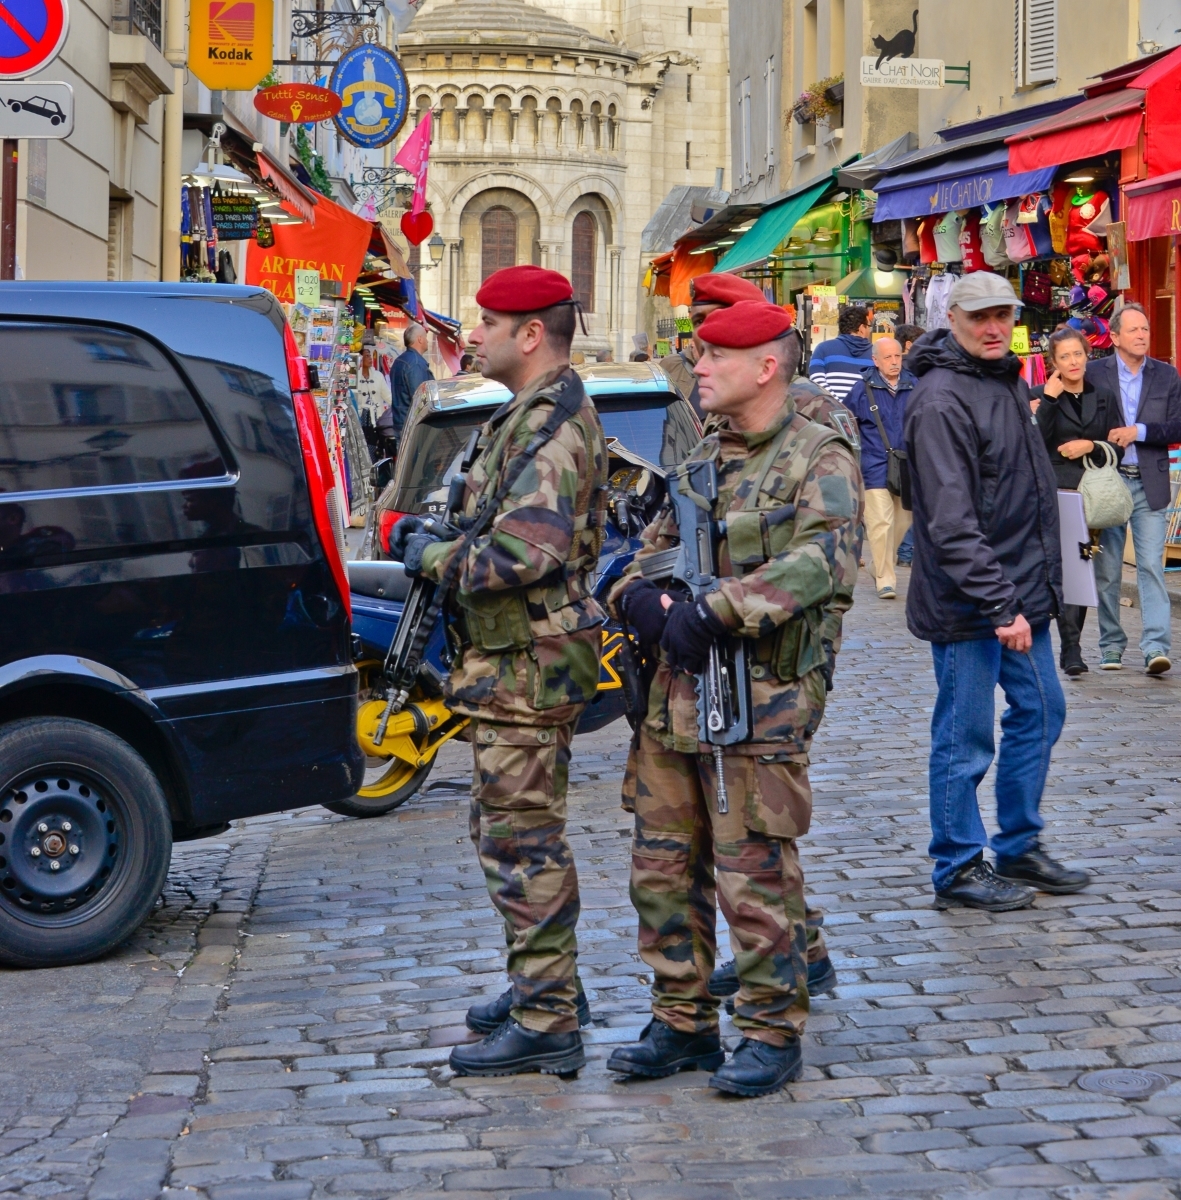 Armed-military-guard-the-streets-where-tourists-frequent-the-Montmarte-18th-Arrondisment-behind-Sacre-Coeur-Cathedral.-JB-1-Place-by-Barbara-Masek-PE